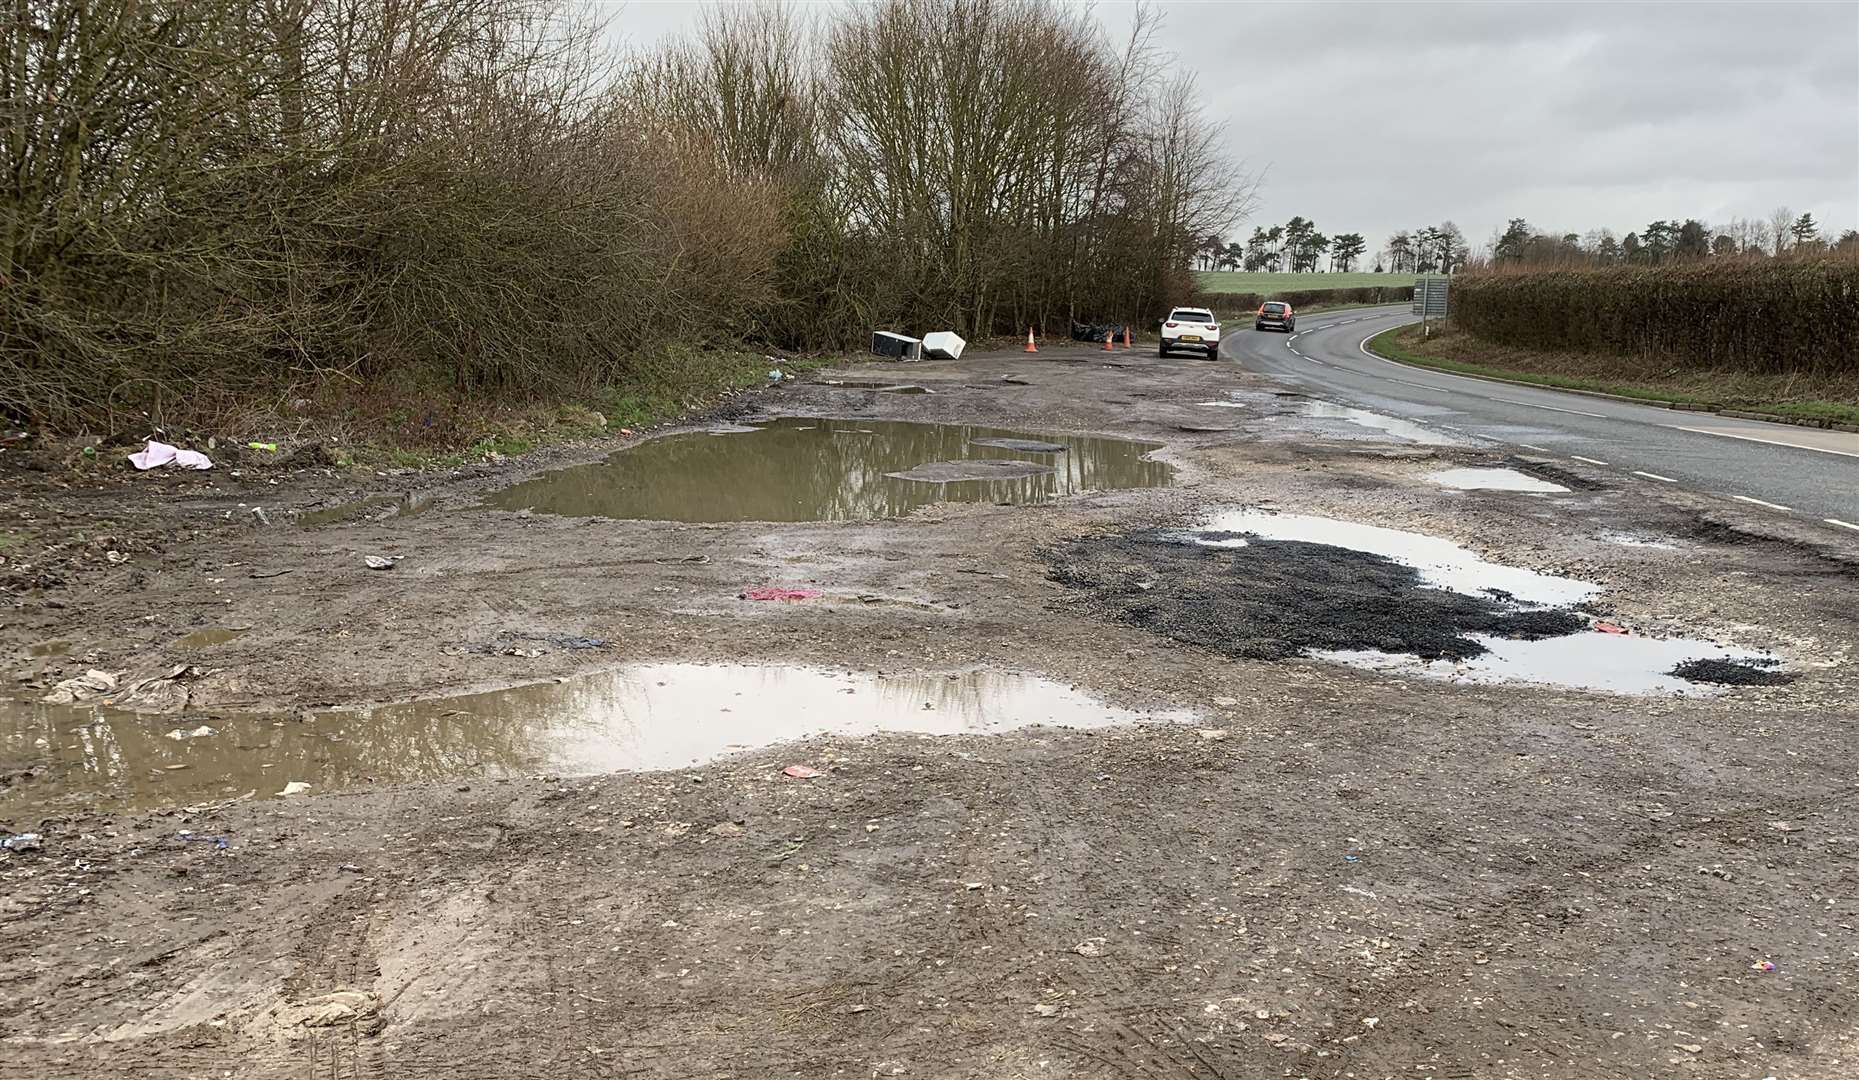 Land off the B2046 Adisham Road where lorry and car drivers stop for breaks